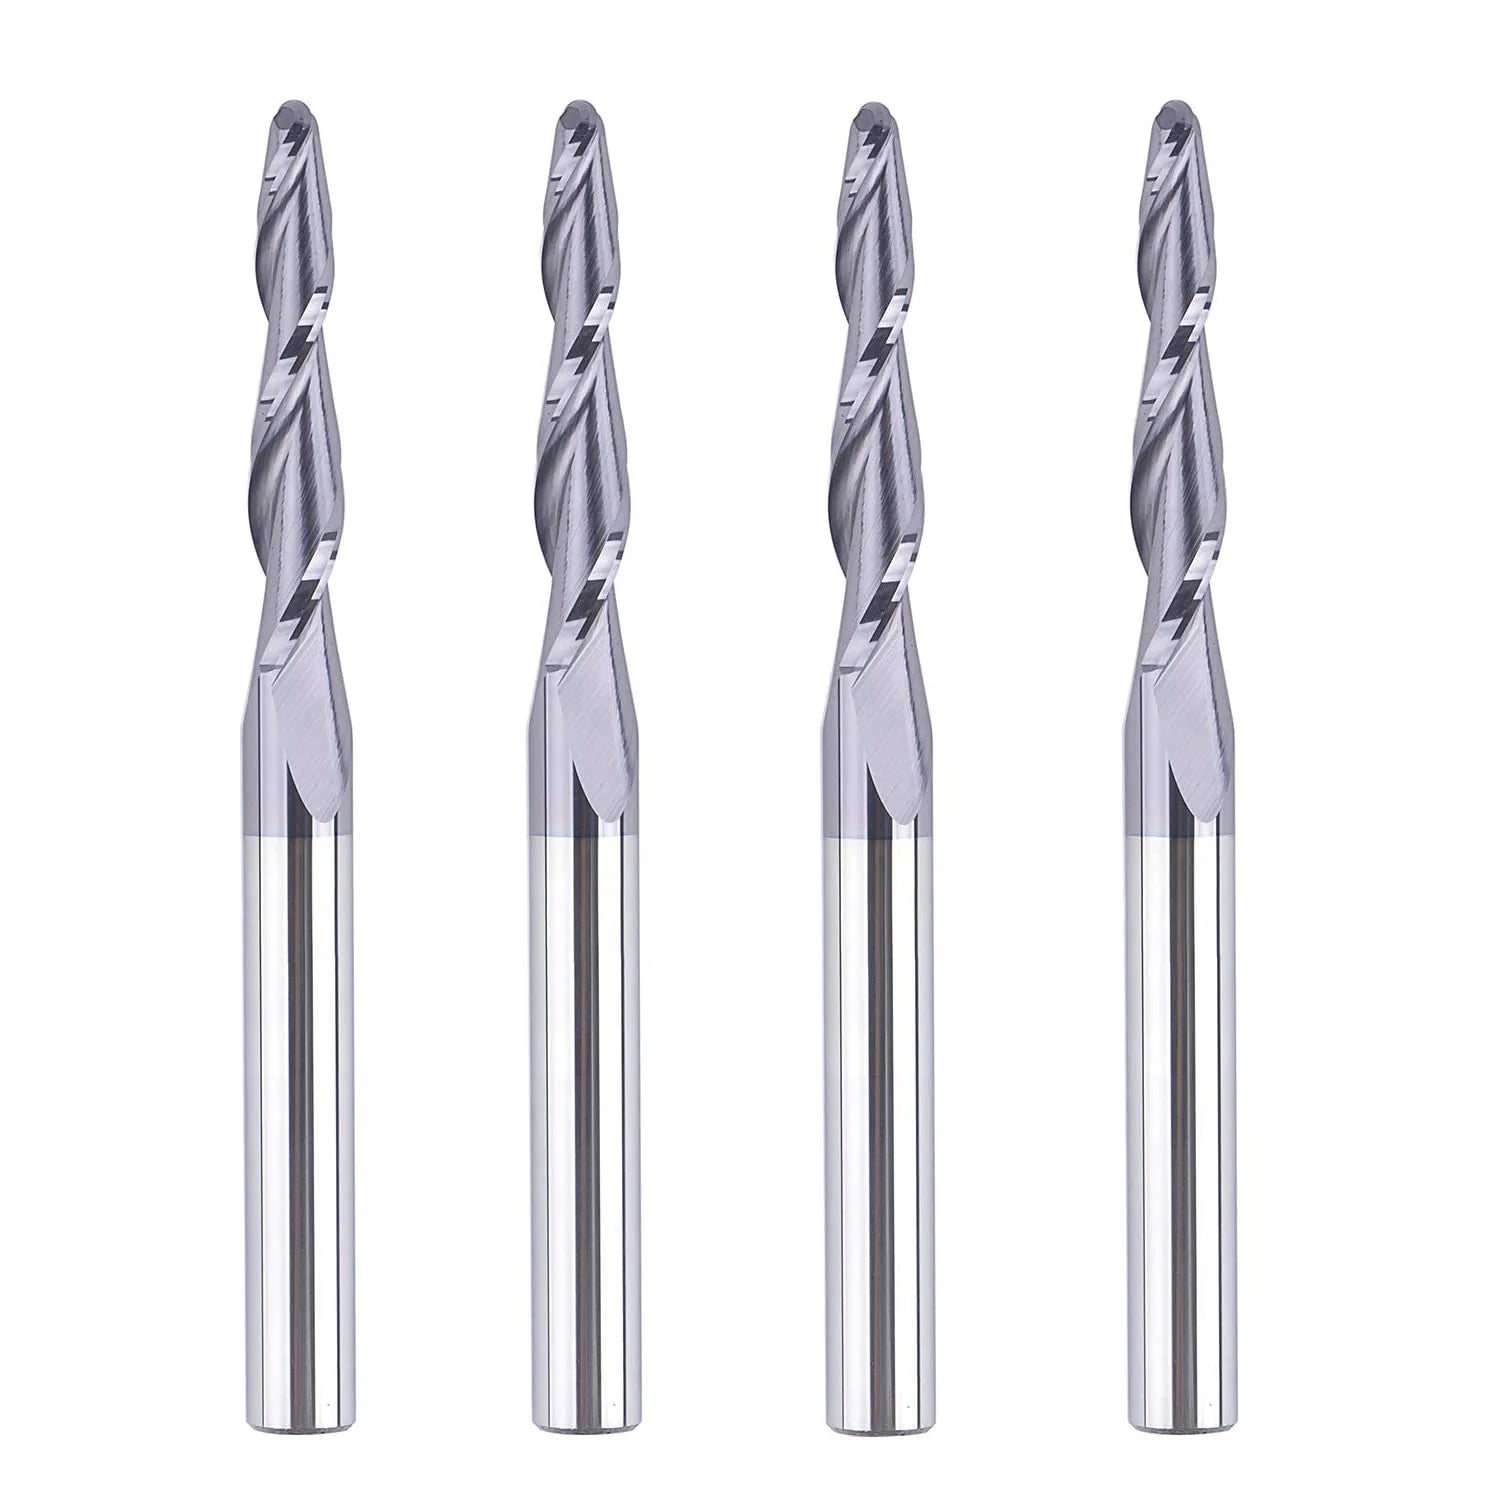 SpeTool CA W01017 CNC 2D and 3D Carving 2.2 Deg Tapered Angle Ball Nose 2.0mm Radius x 1/4" Shank x 1-1/4" Cutting Length x 3" Long 2 Flute SC TiAlN Coated Upcut Router Bit